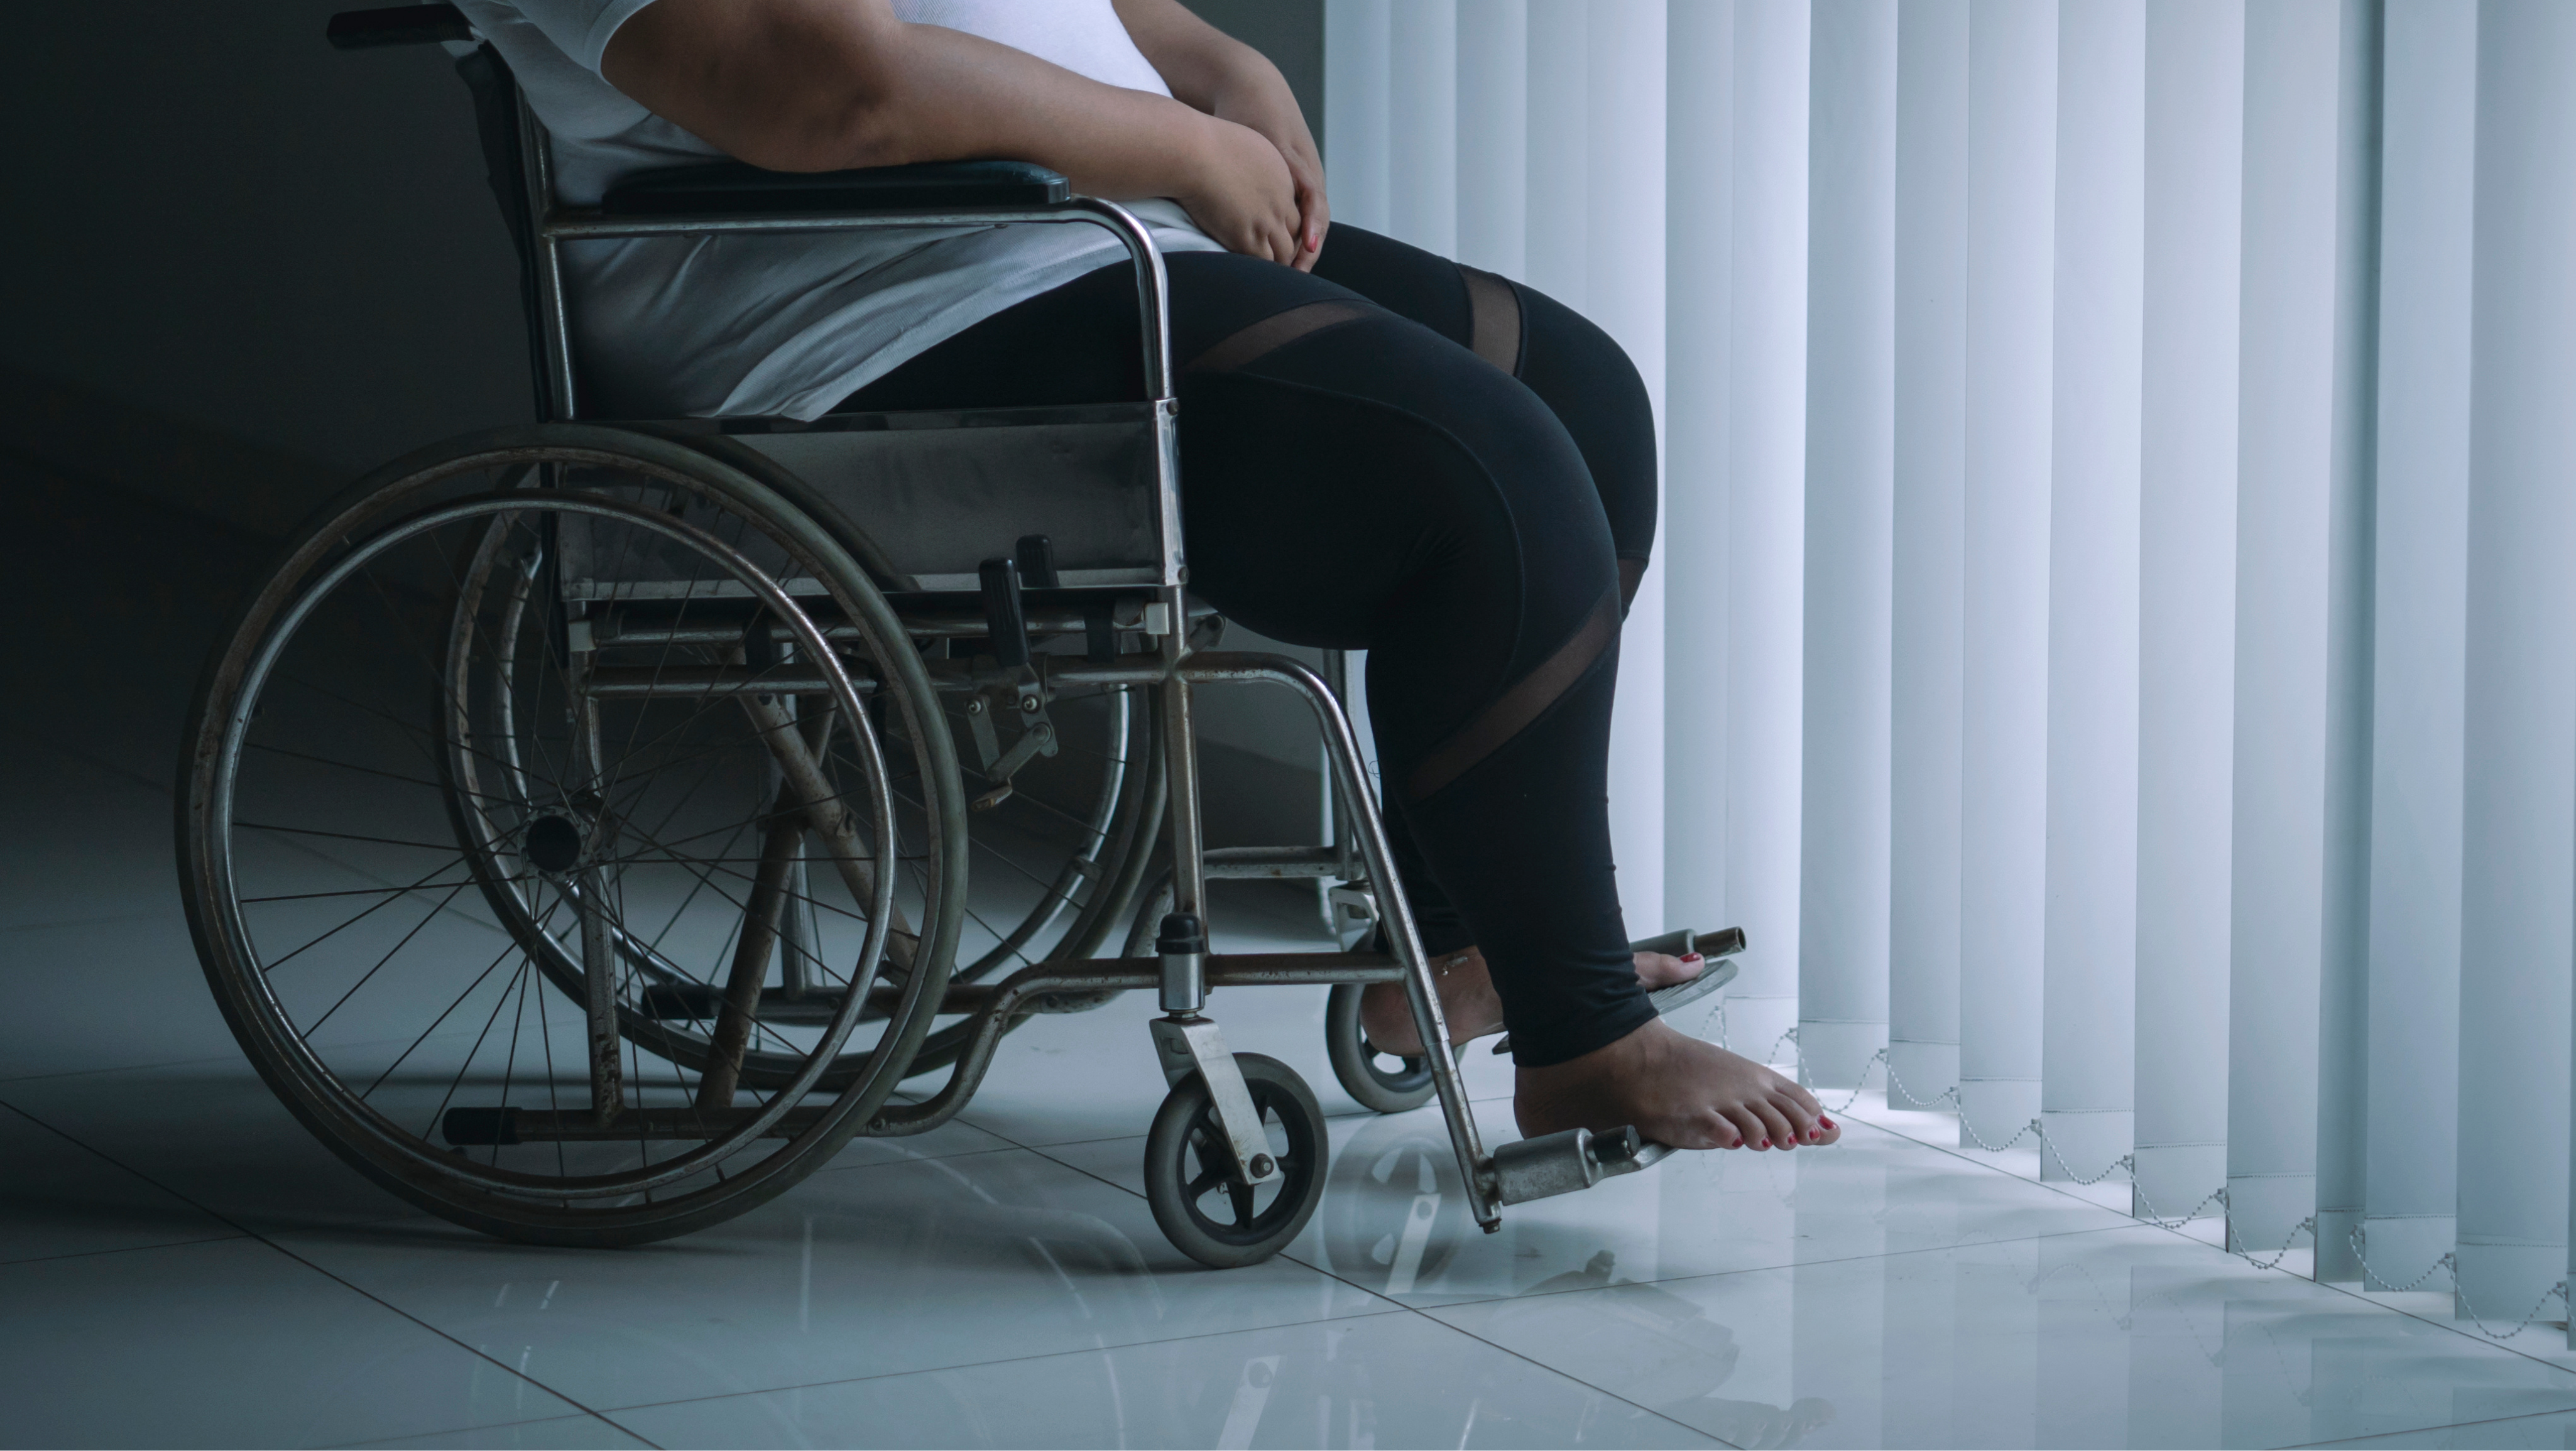 Photo of a woman sitting in a wheelchair. Her face and upper body are not visible. She is barefoot and wearing athletic leggings.